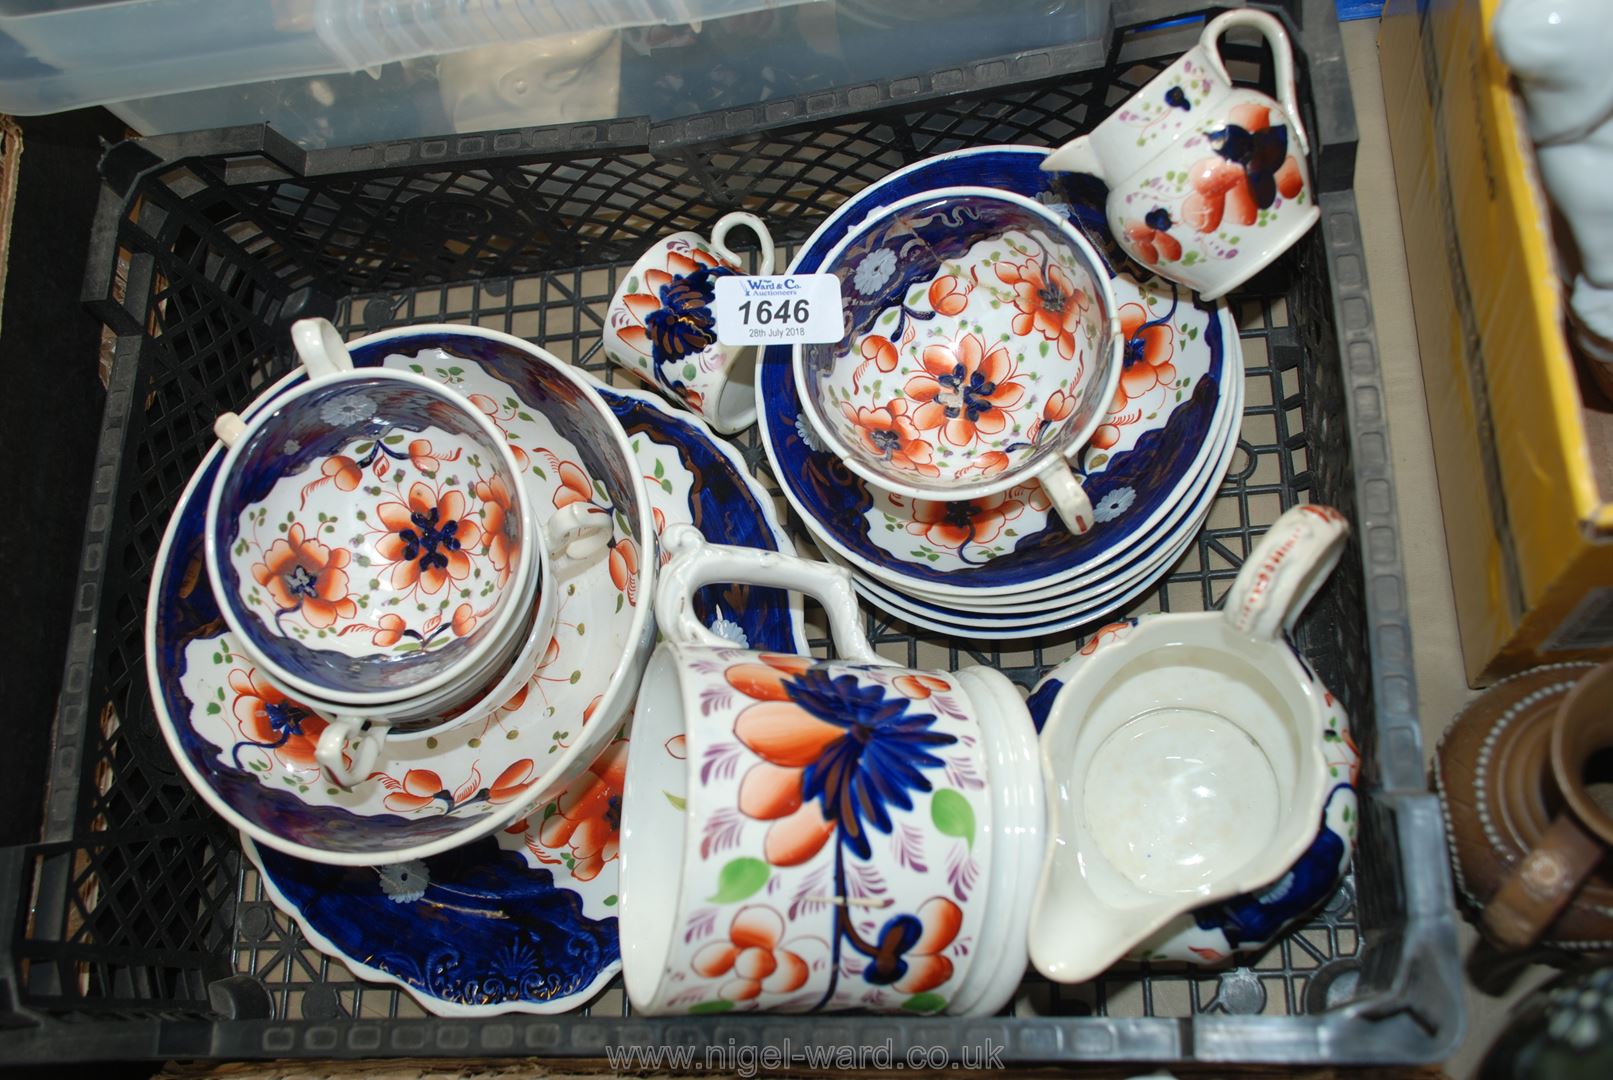 A quantity of Gaudy Welsh including five cups and saucers (one cup and one saucer a/f),